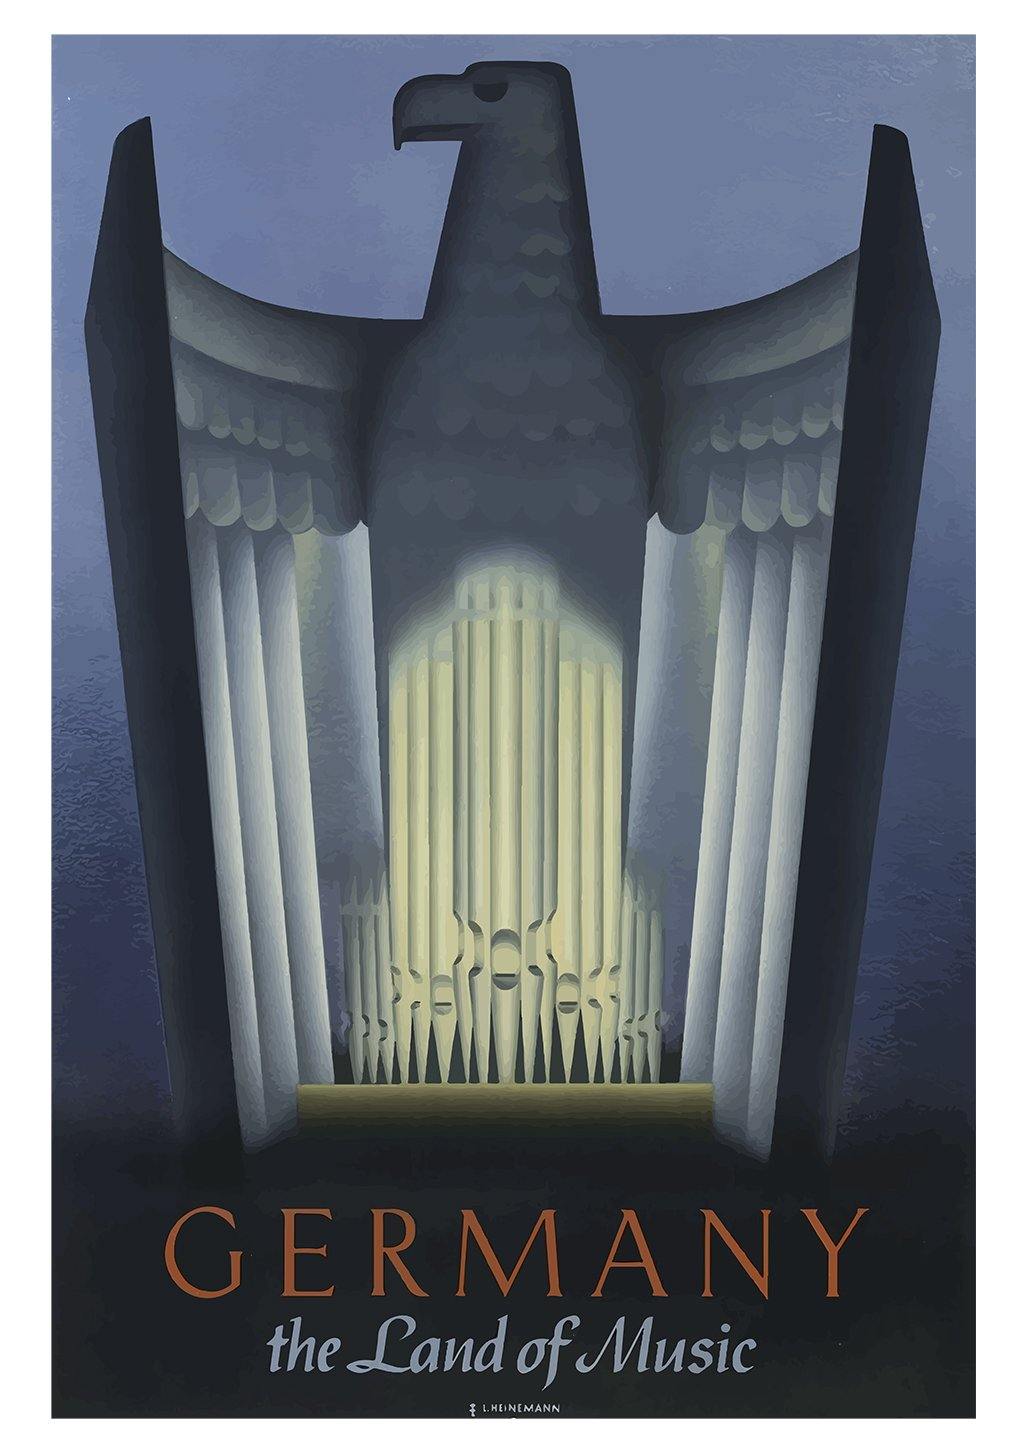 GERMANY POSTER: The Land of Music Vintage Travel Print - Pimlico Prints